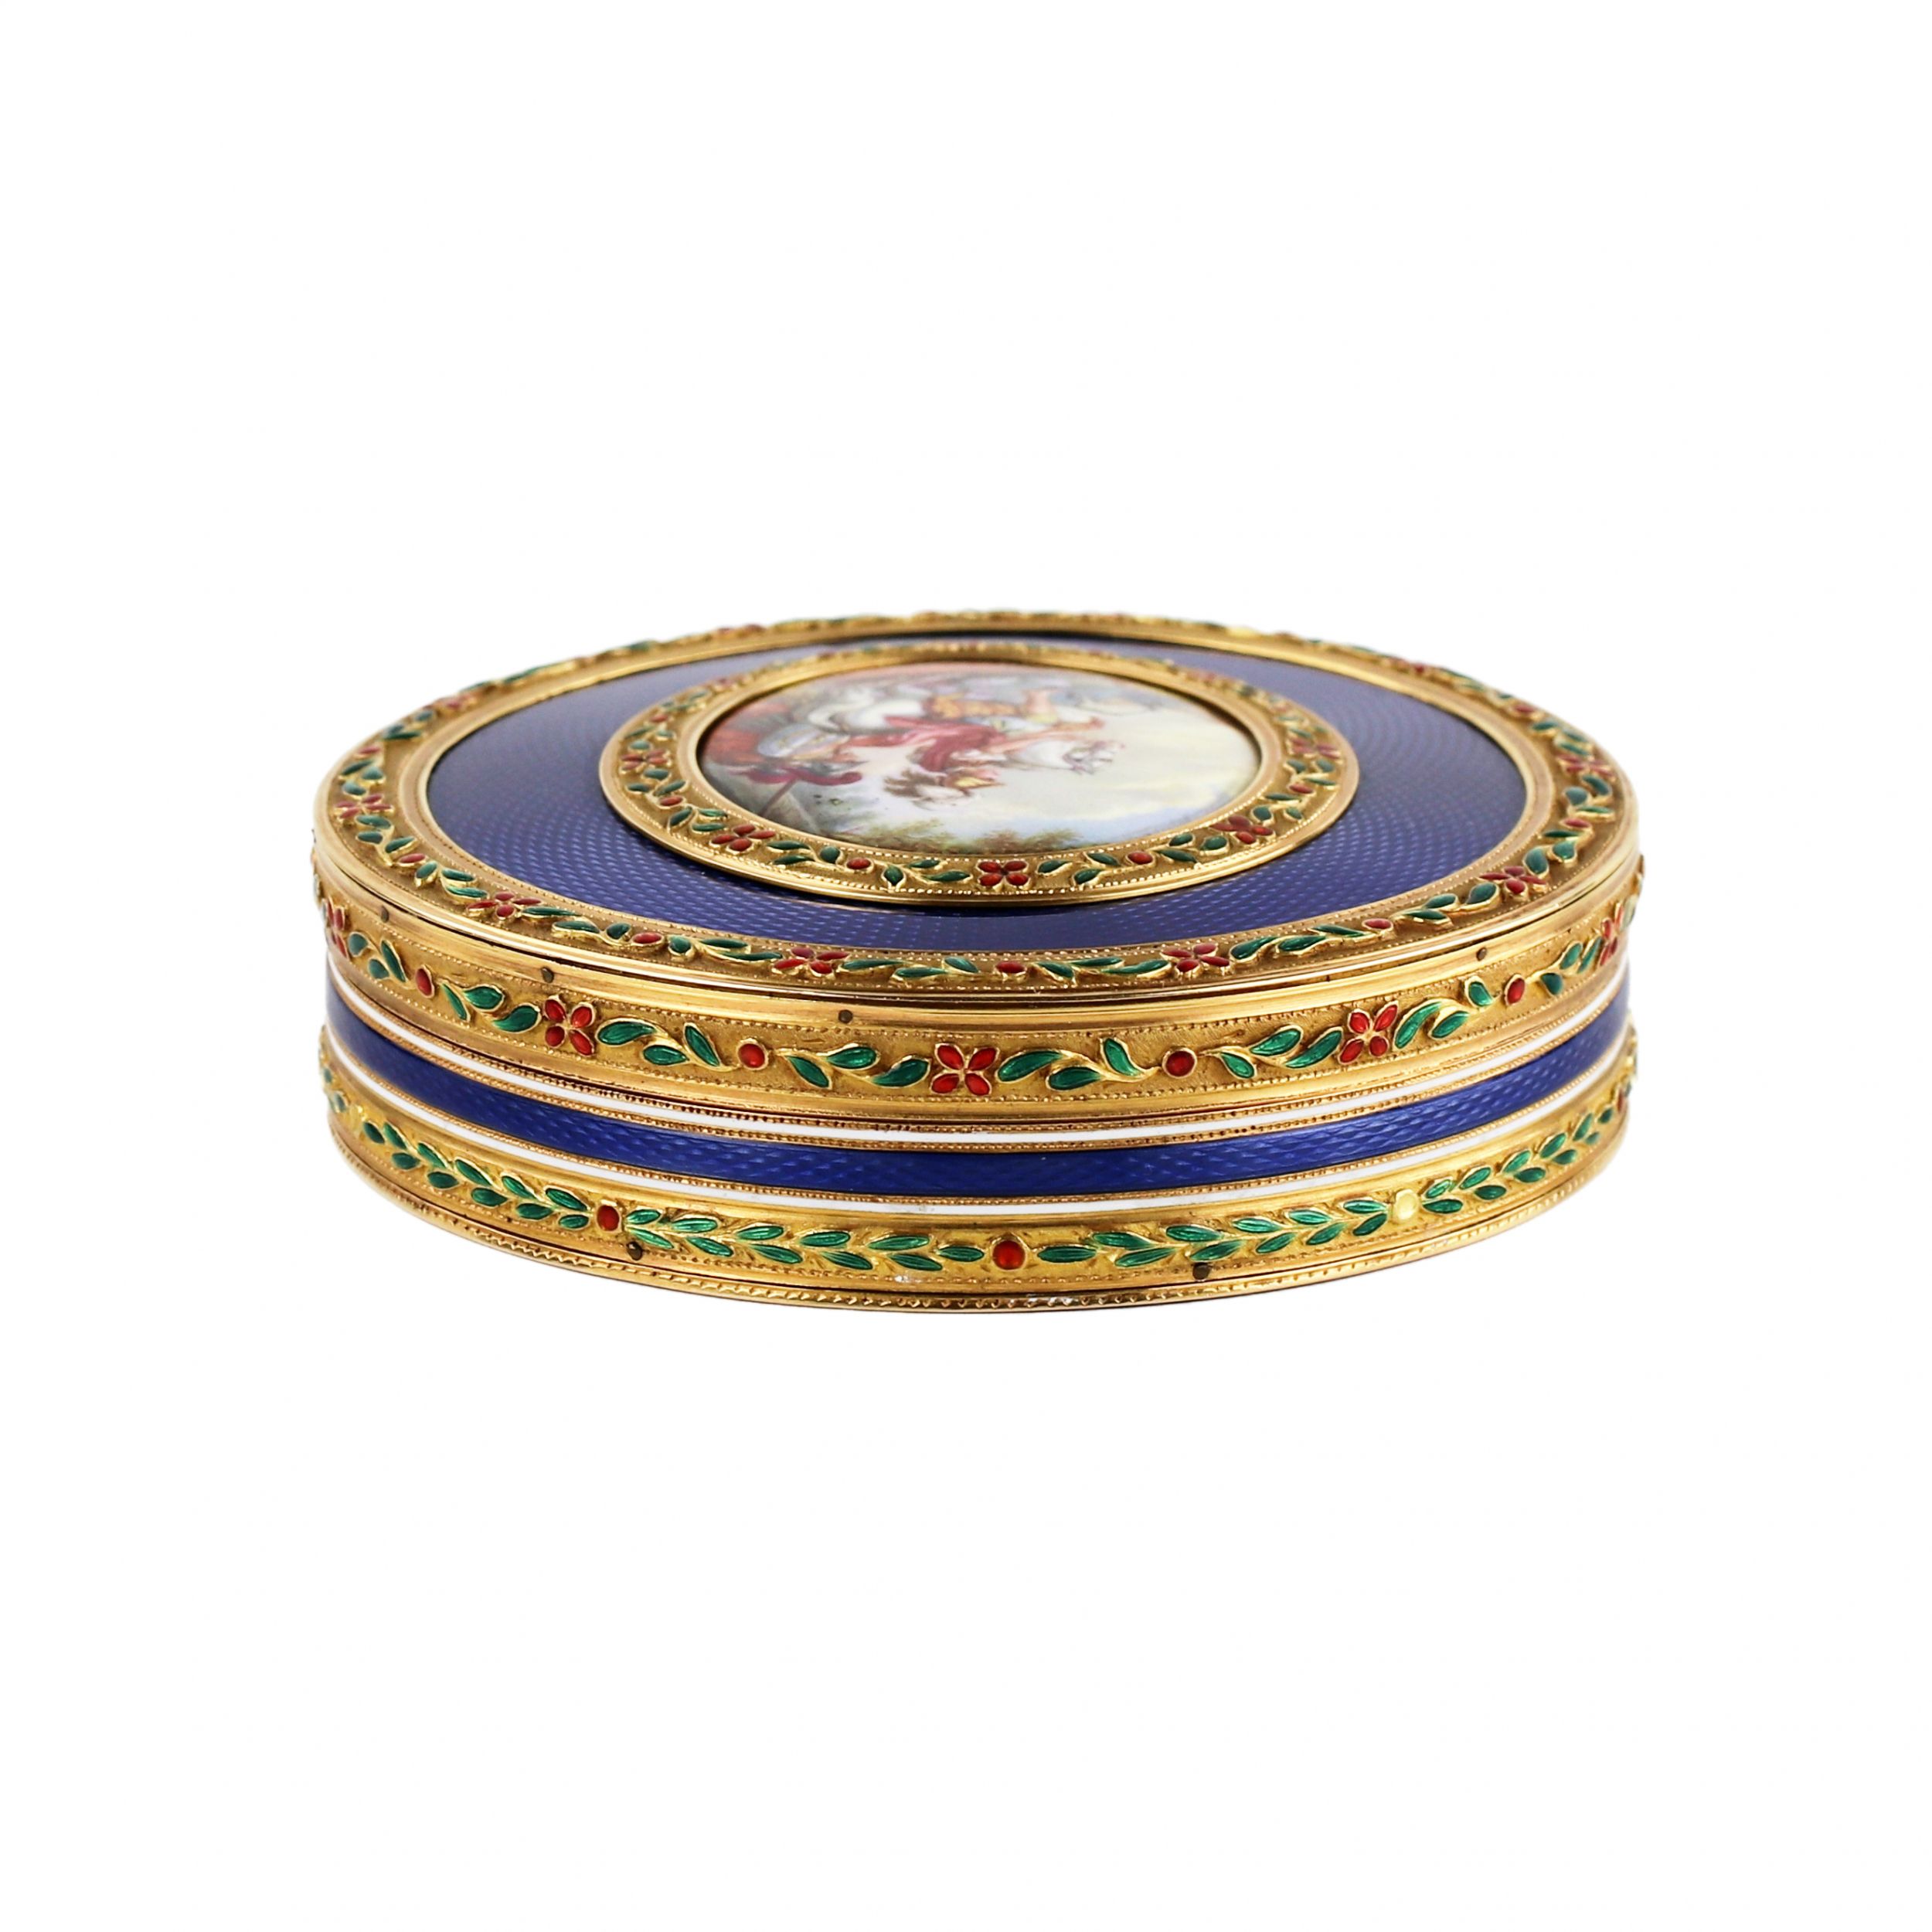 French gilded snuffbox of the late 18th century, with enamel decoration and painting. - Image 2 of 10